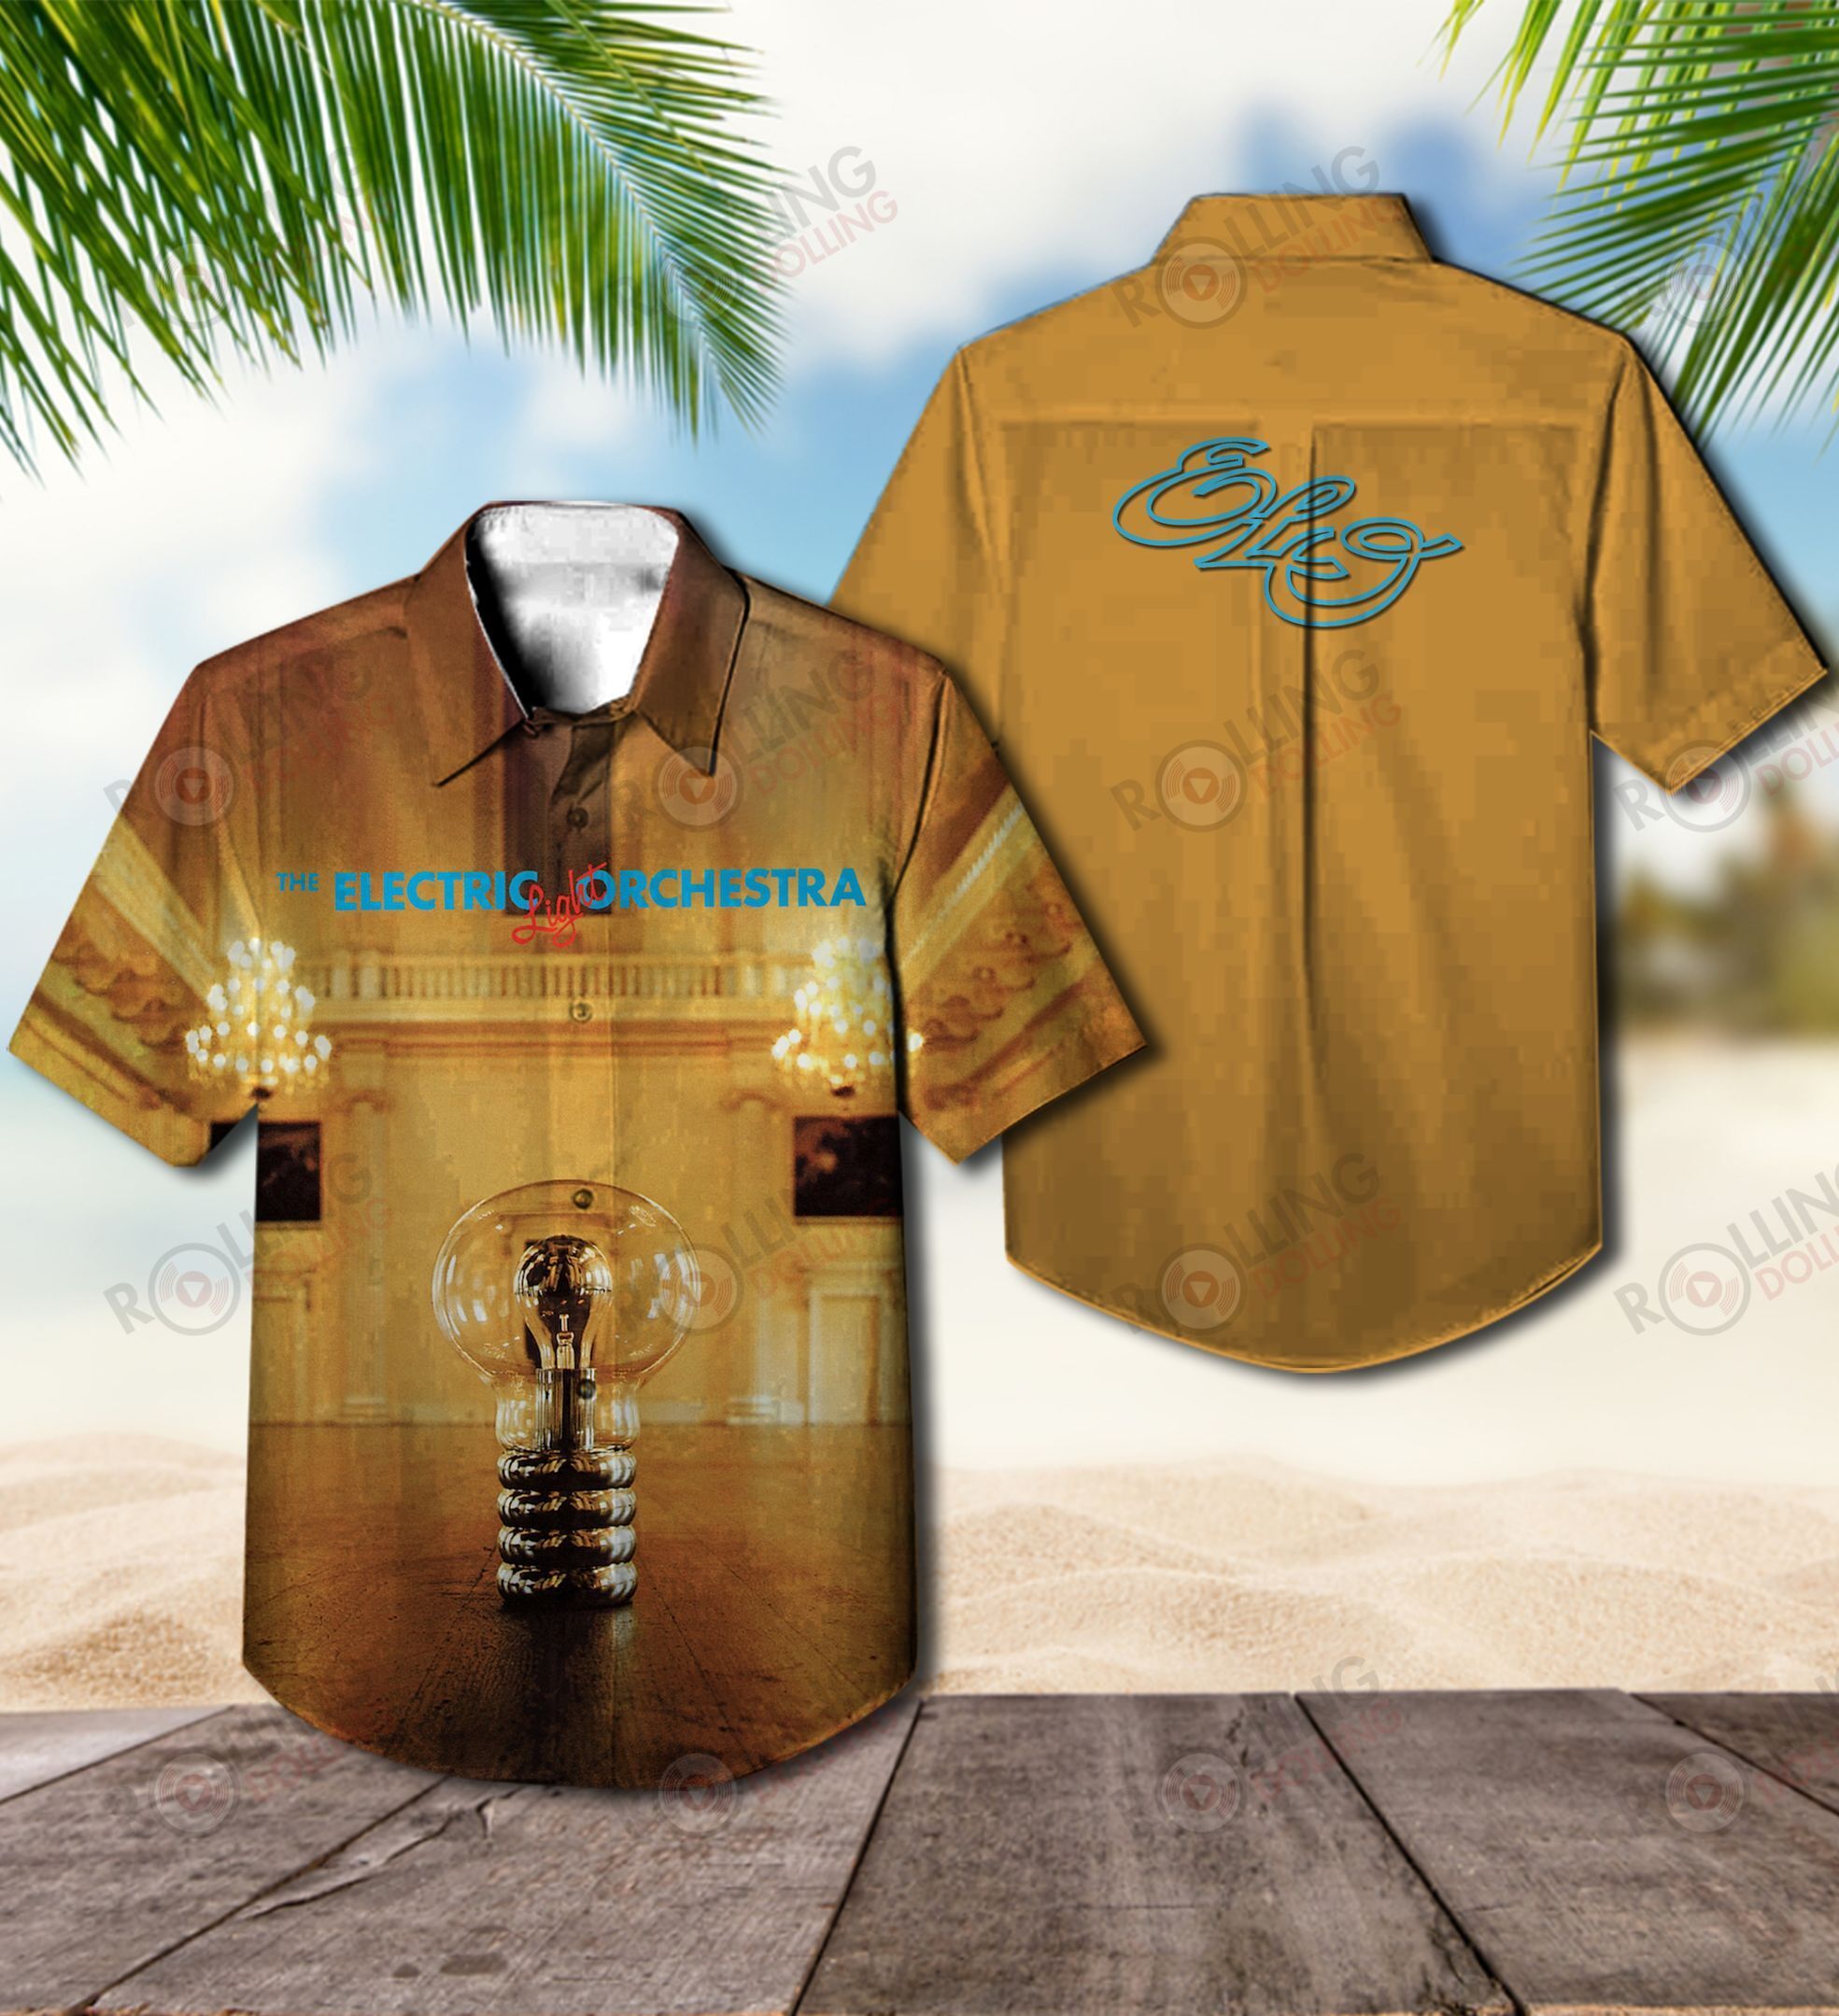 This would make a great gift for any fan who loves Hawaiian Shirt as well as Rock band 126